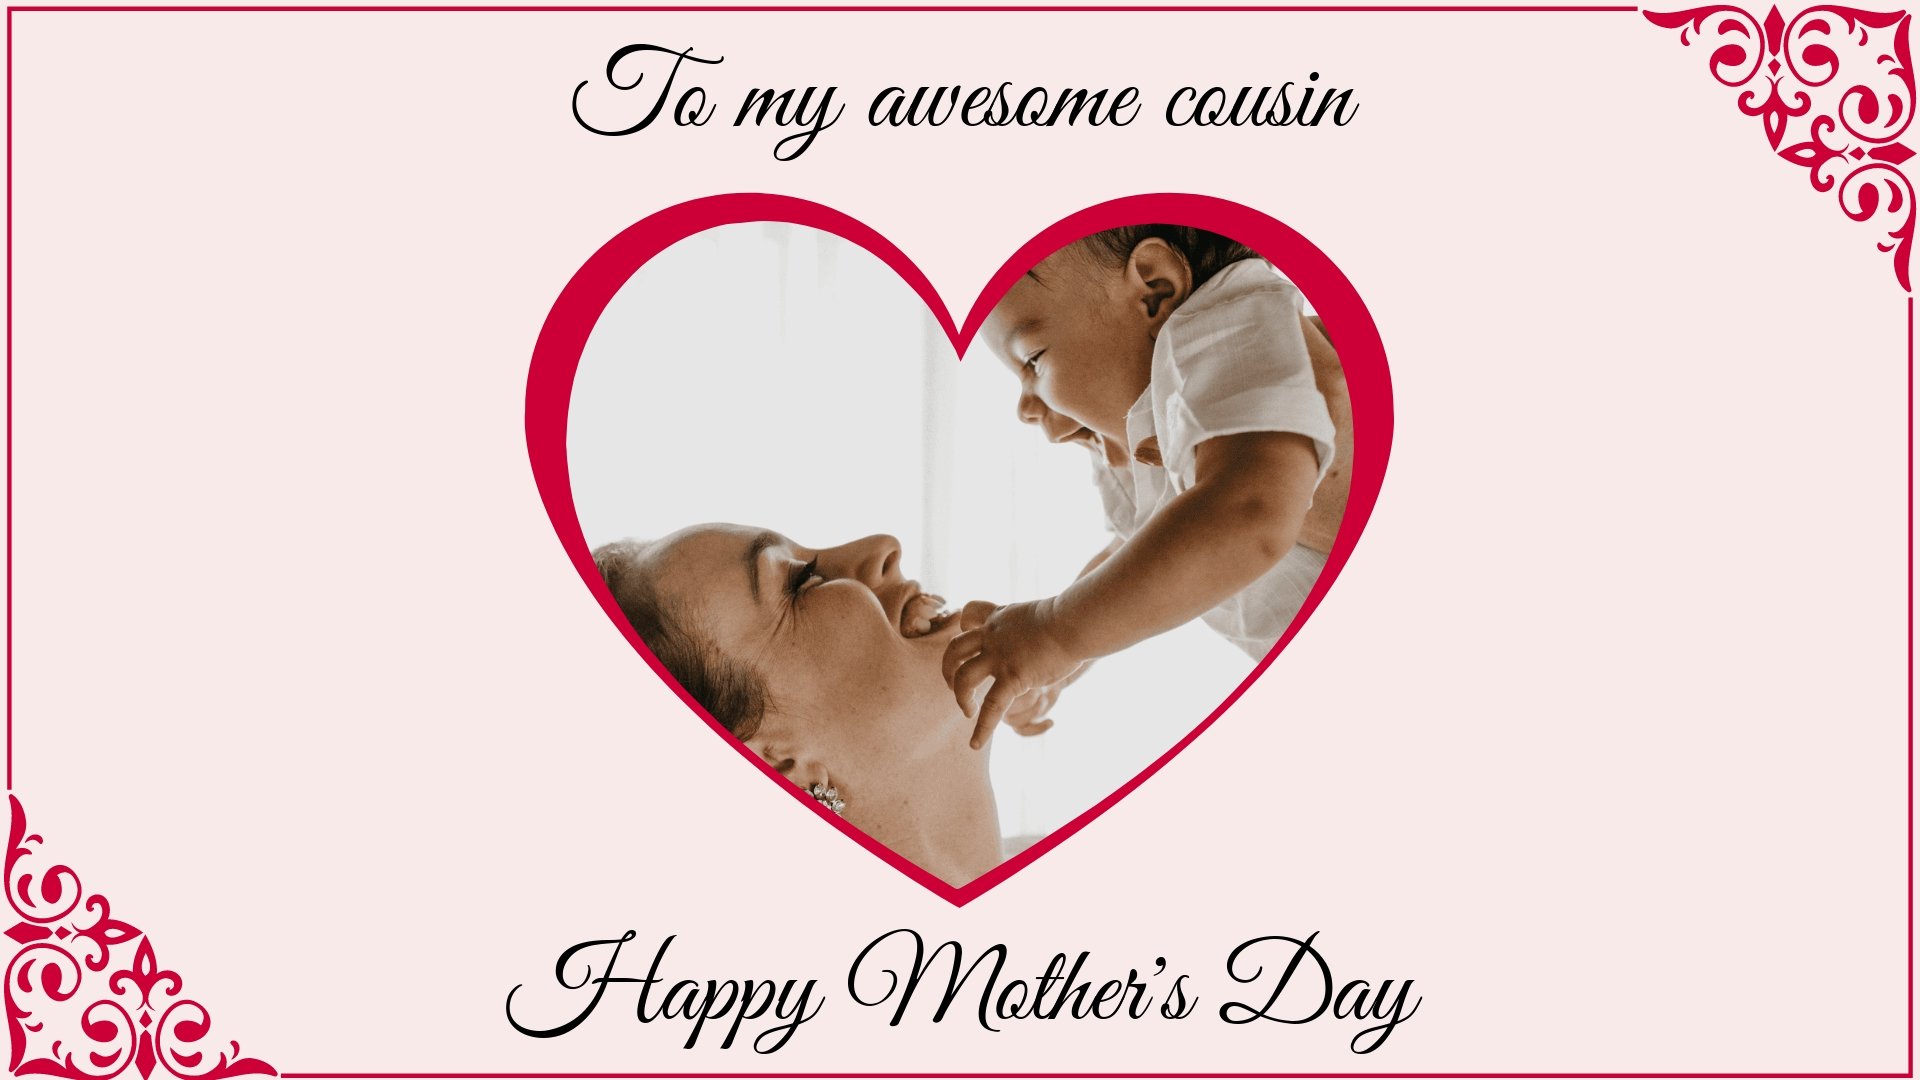 Happy Mother's Day Cousins Image